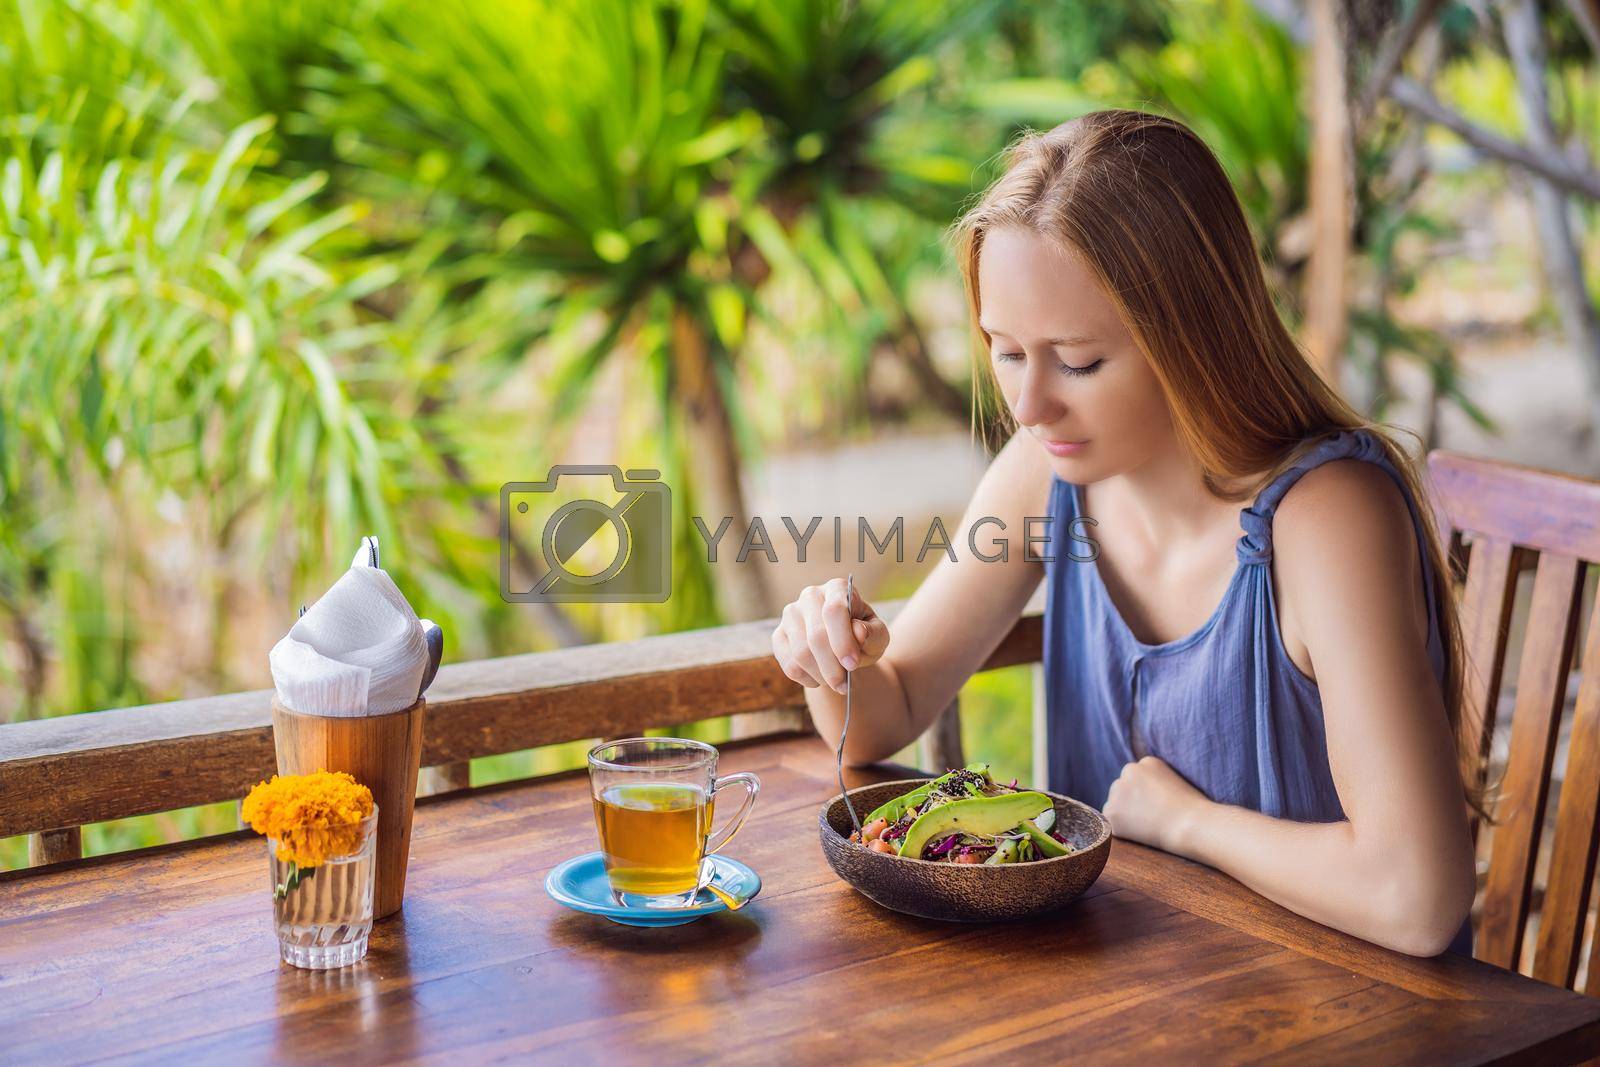 Royalty free image of Woman eating quinoa salad. Eat healthy food lifestyle concept with beautiful young woman by galitskaya